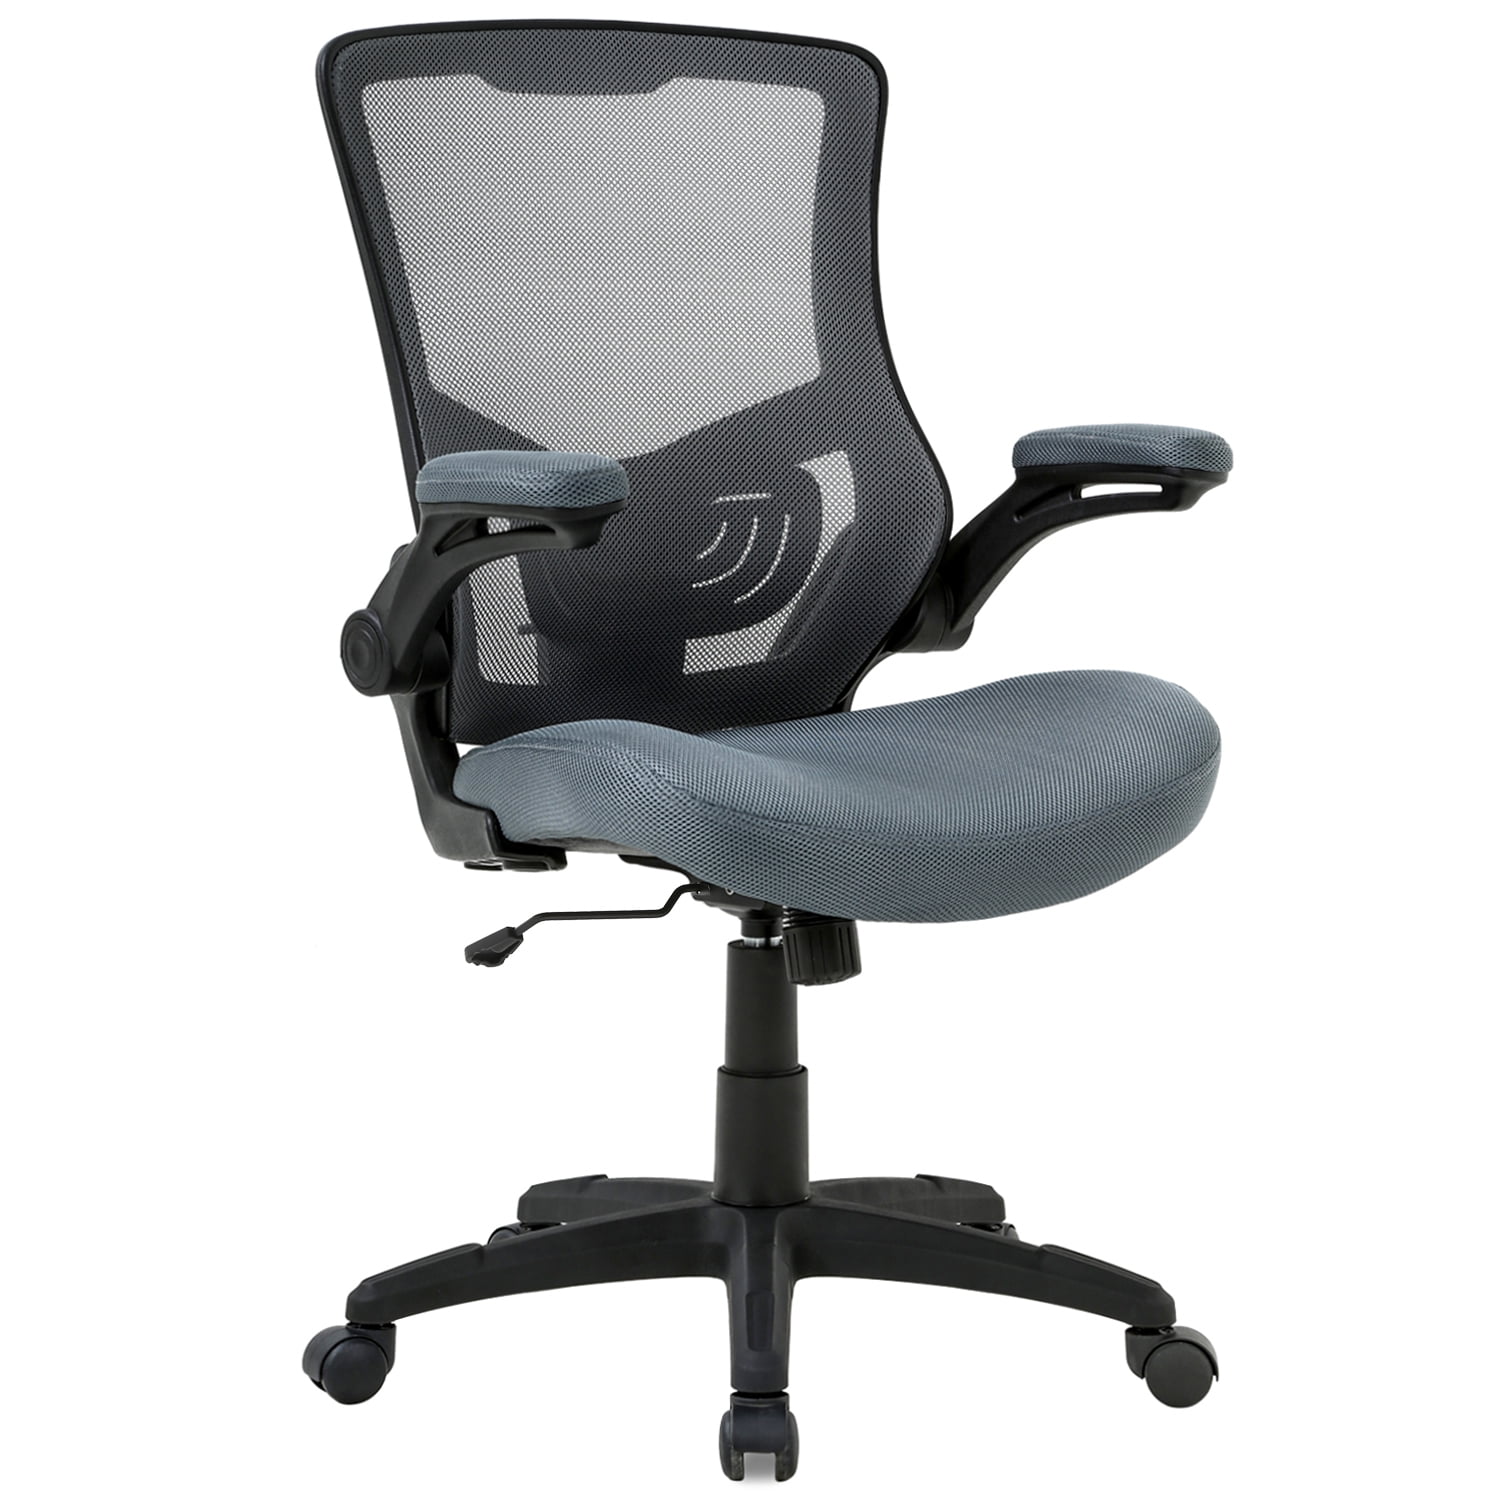 Ergonomic Computer Desk Chair Executive Mesh Office Chair High Back Swivel Chair with Lumbar Support Office Chair Black